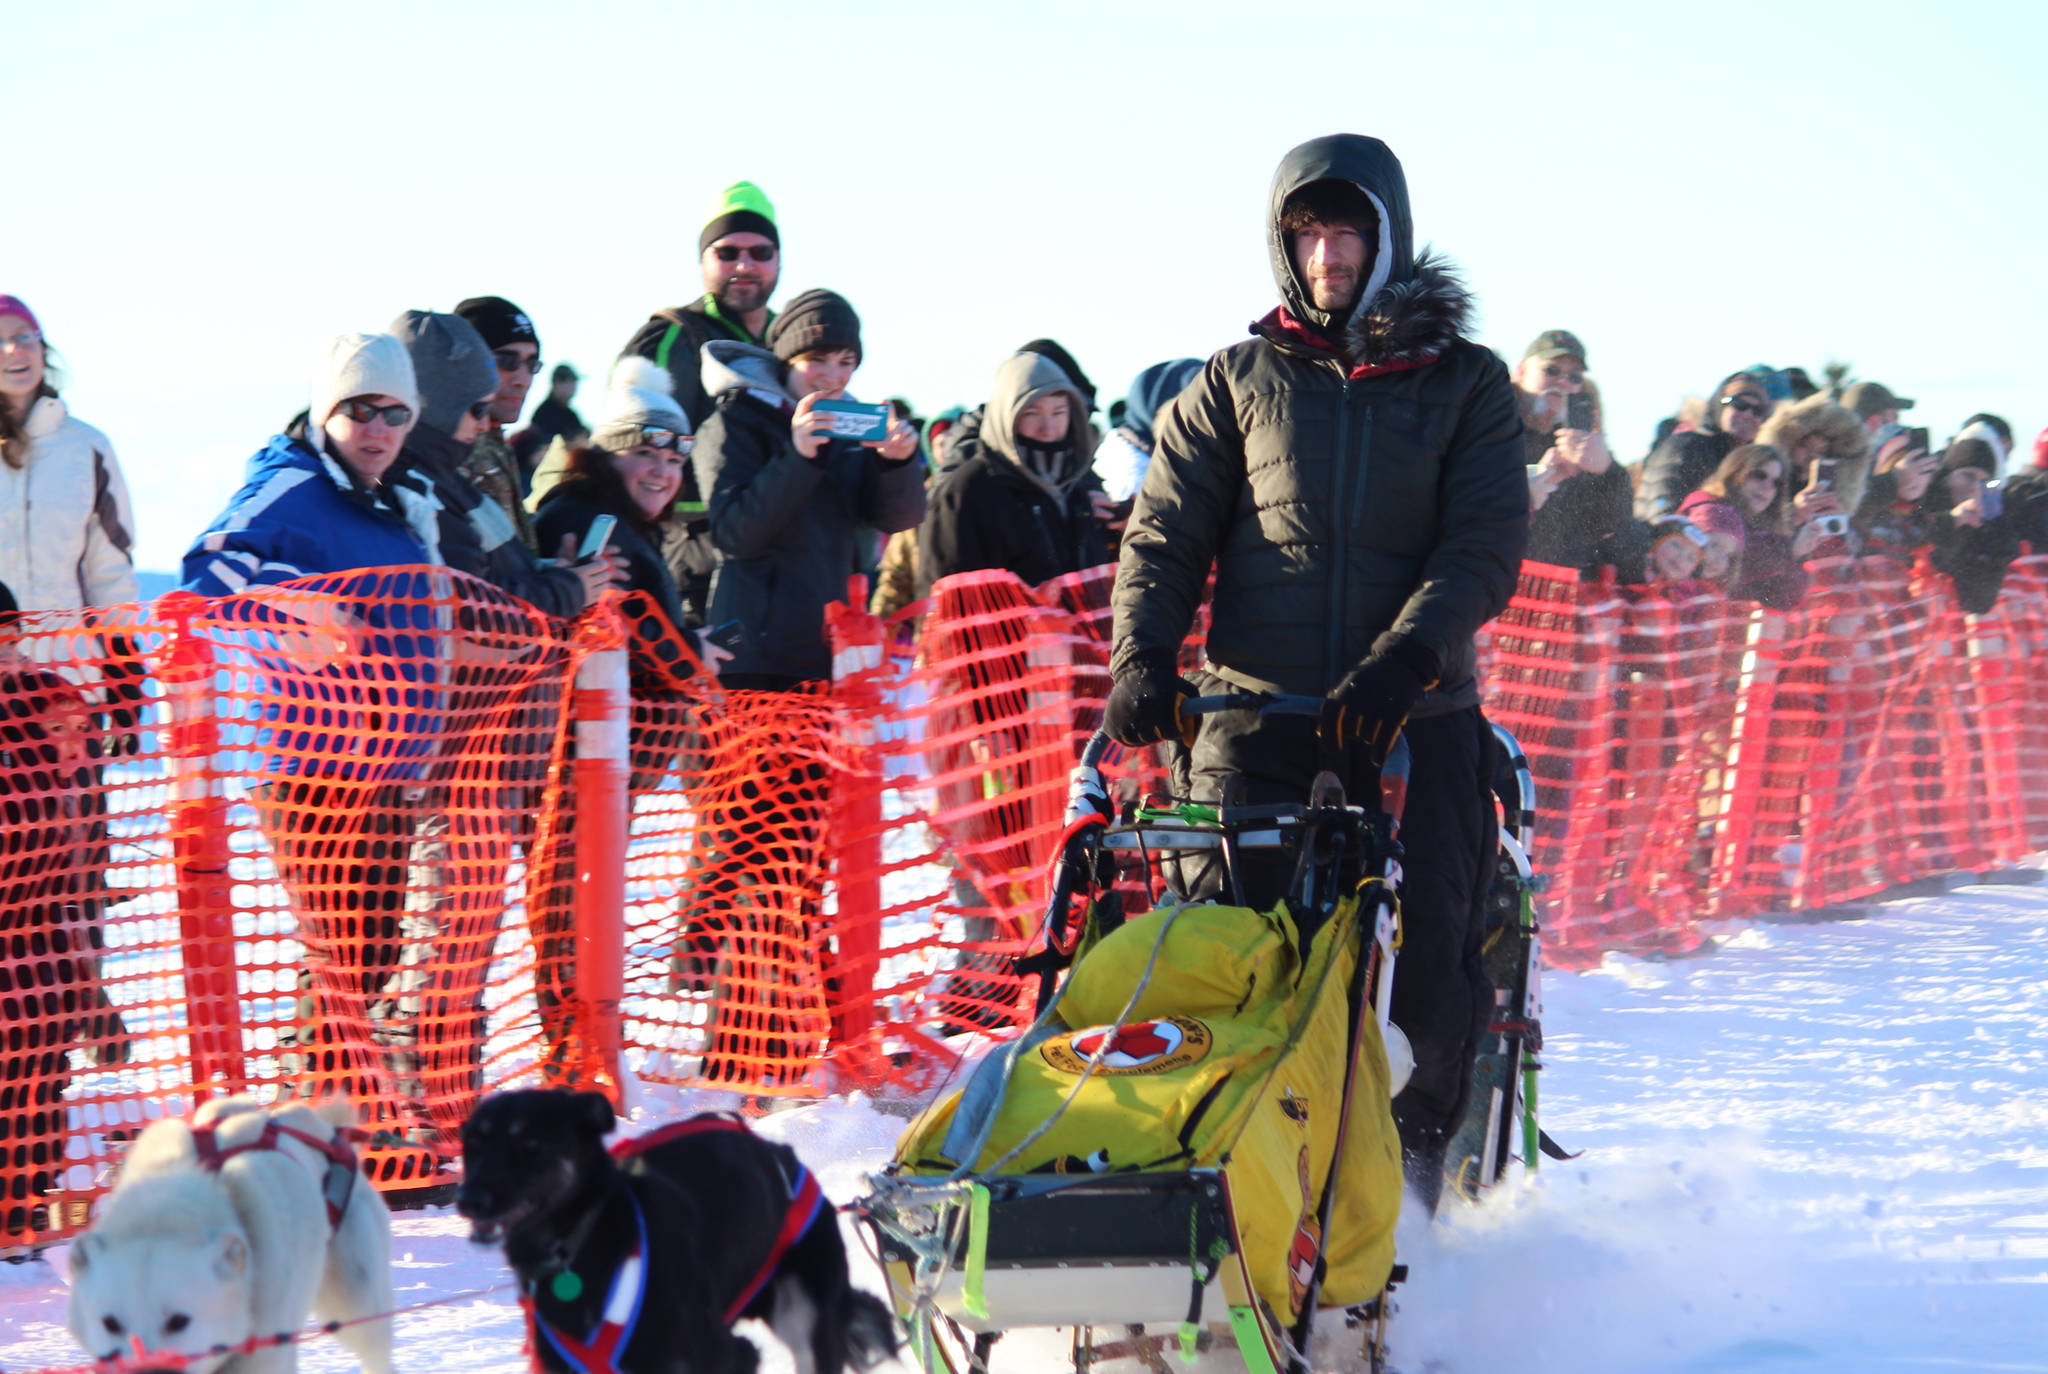 Musher Nicolas Petit takes off with his team from the starting line of this year’s Tustumena 200 Sled Dog Race on Saturday, Jan. 27, 2018 at Freddie’s Roadhouse in Ninilchik, Alaska. Petit, who took second place in last year’s T200, was the first to start this year and also the first to reach the McNeil Canyon checkpoint. (Photo by Megan Pacer/Homer News)